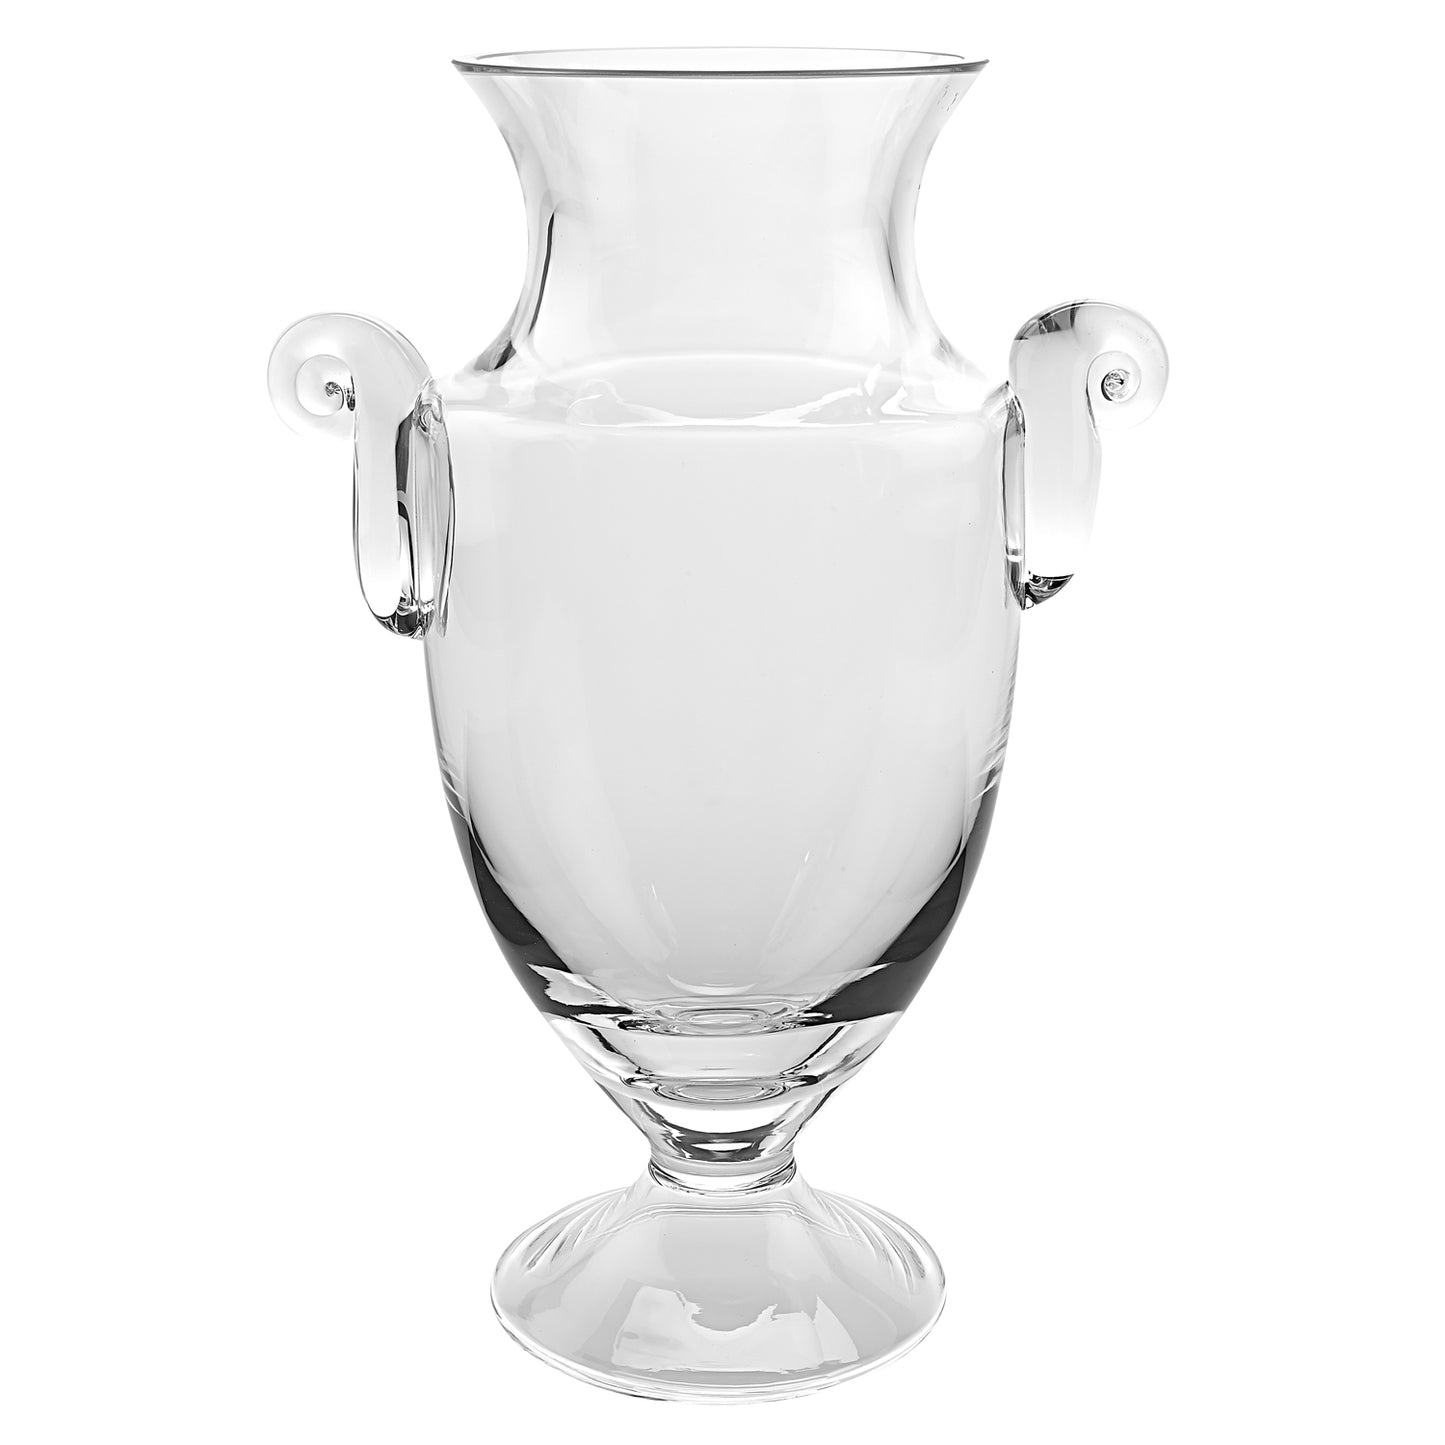 12" Mouth Blown Crystal European Made Trophy Vase